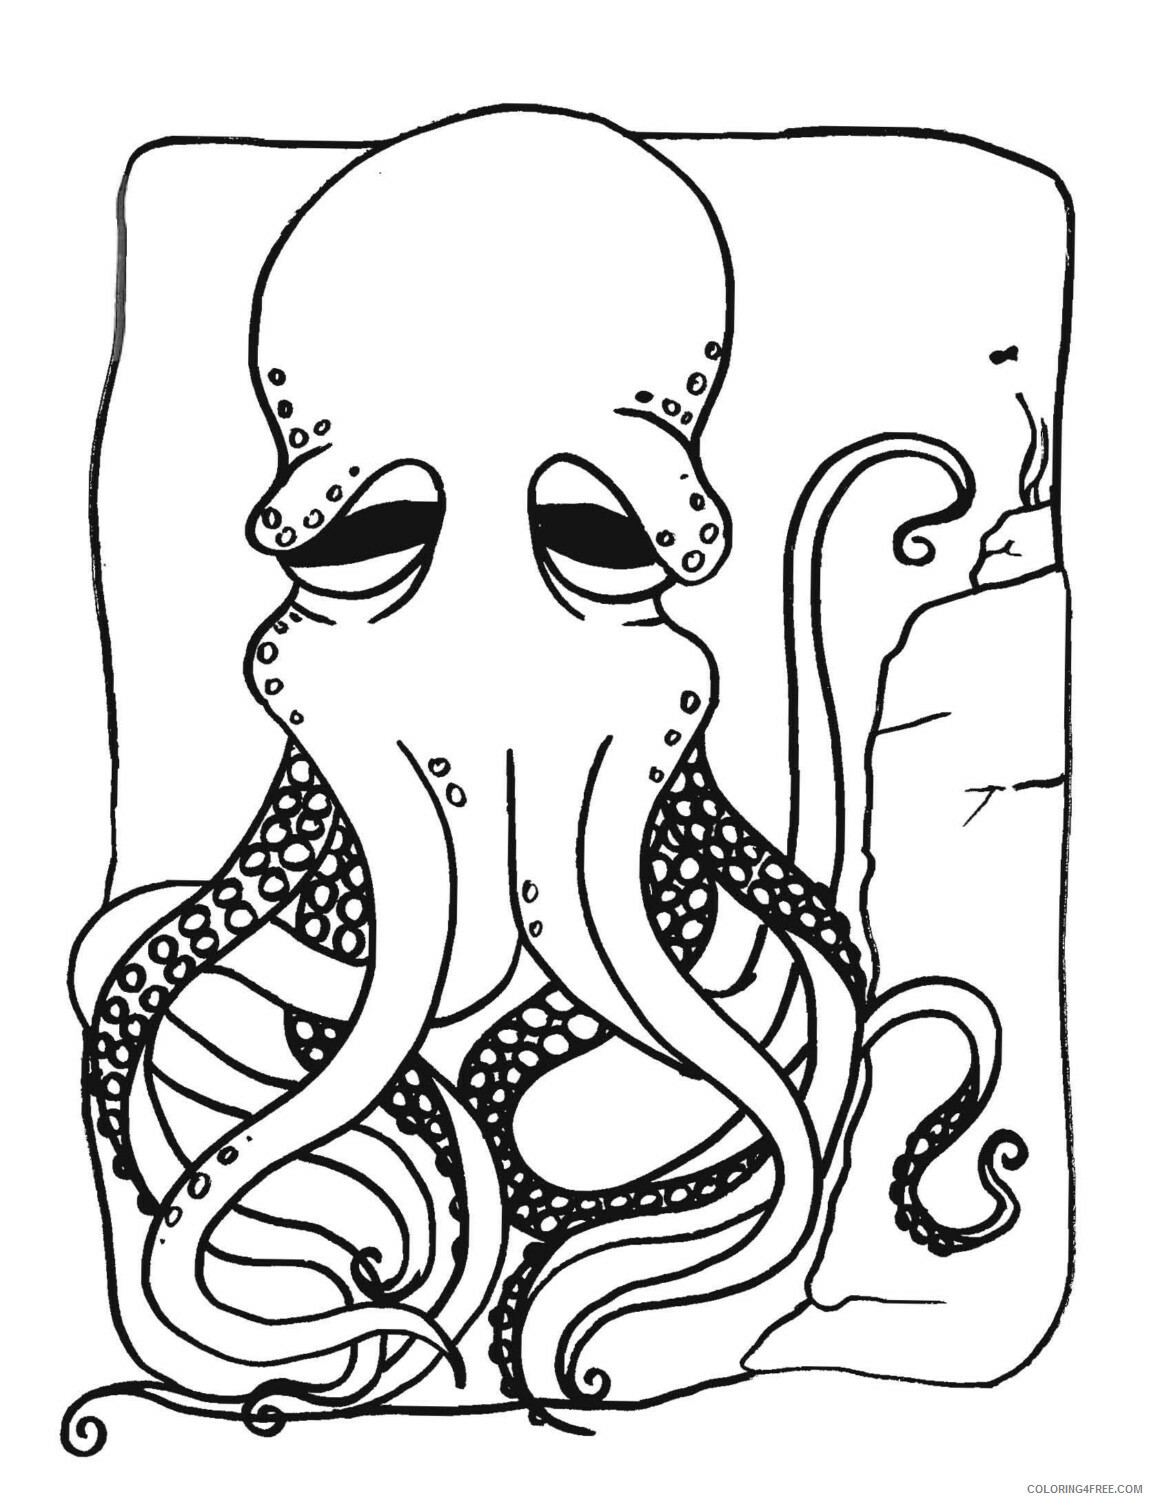 Octopus Coloring Pages Animal Printable Sheets Octopus Print 2021 3526 Coloring4free